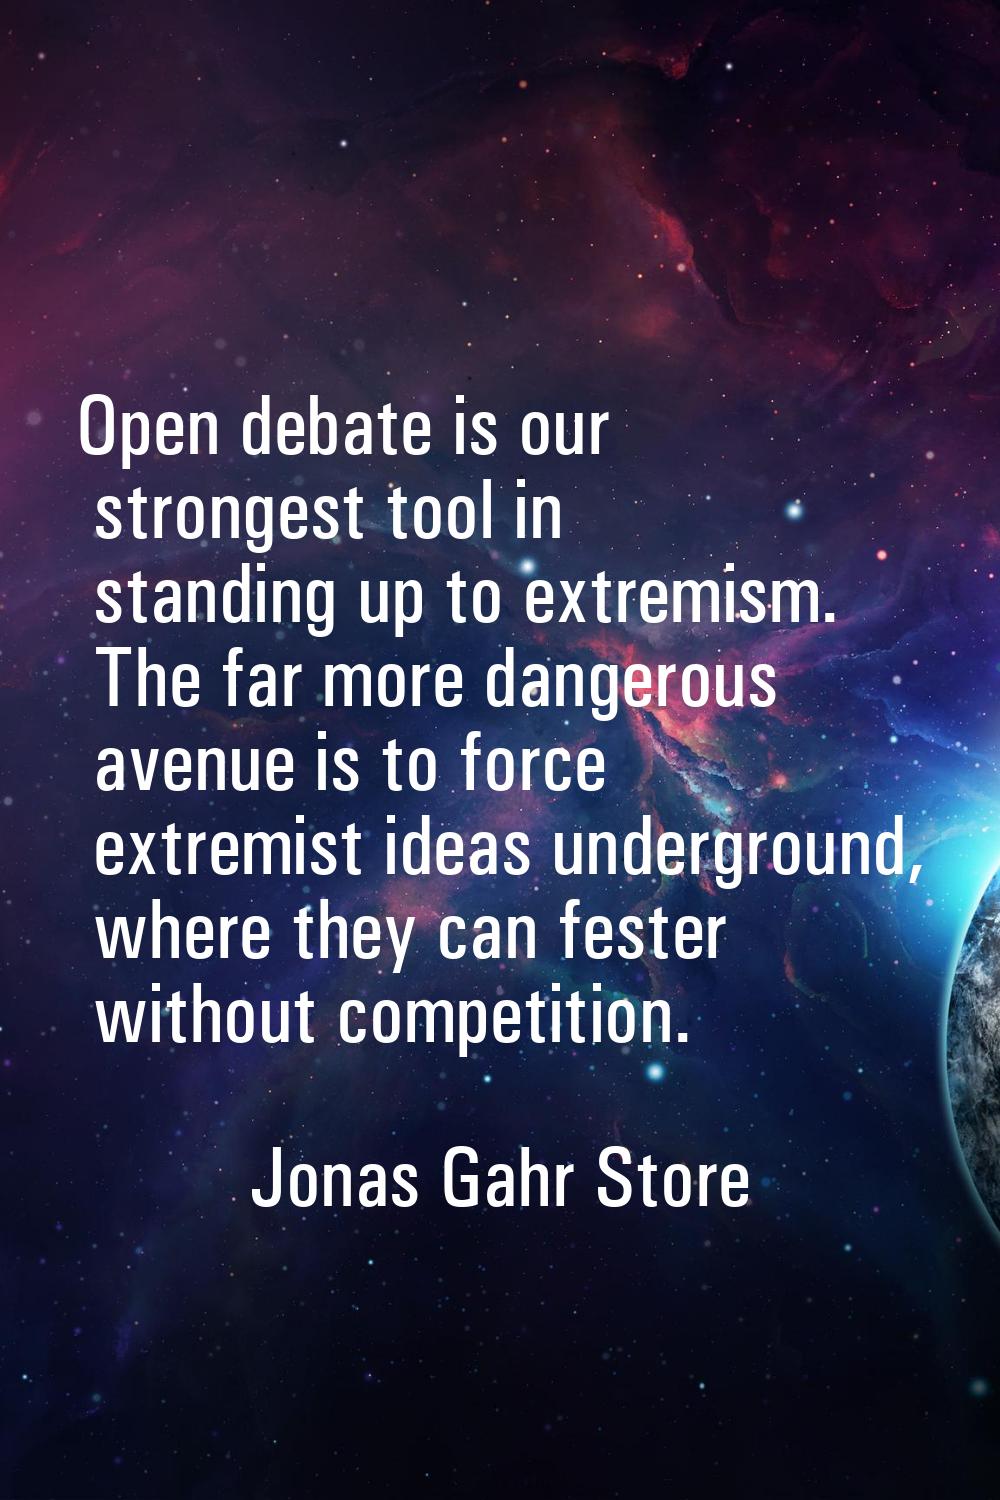 Open debate is our strongest tool in standing up to extremism. The far more dangerous avenue is to 